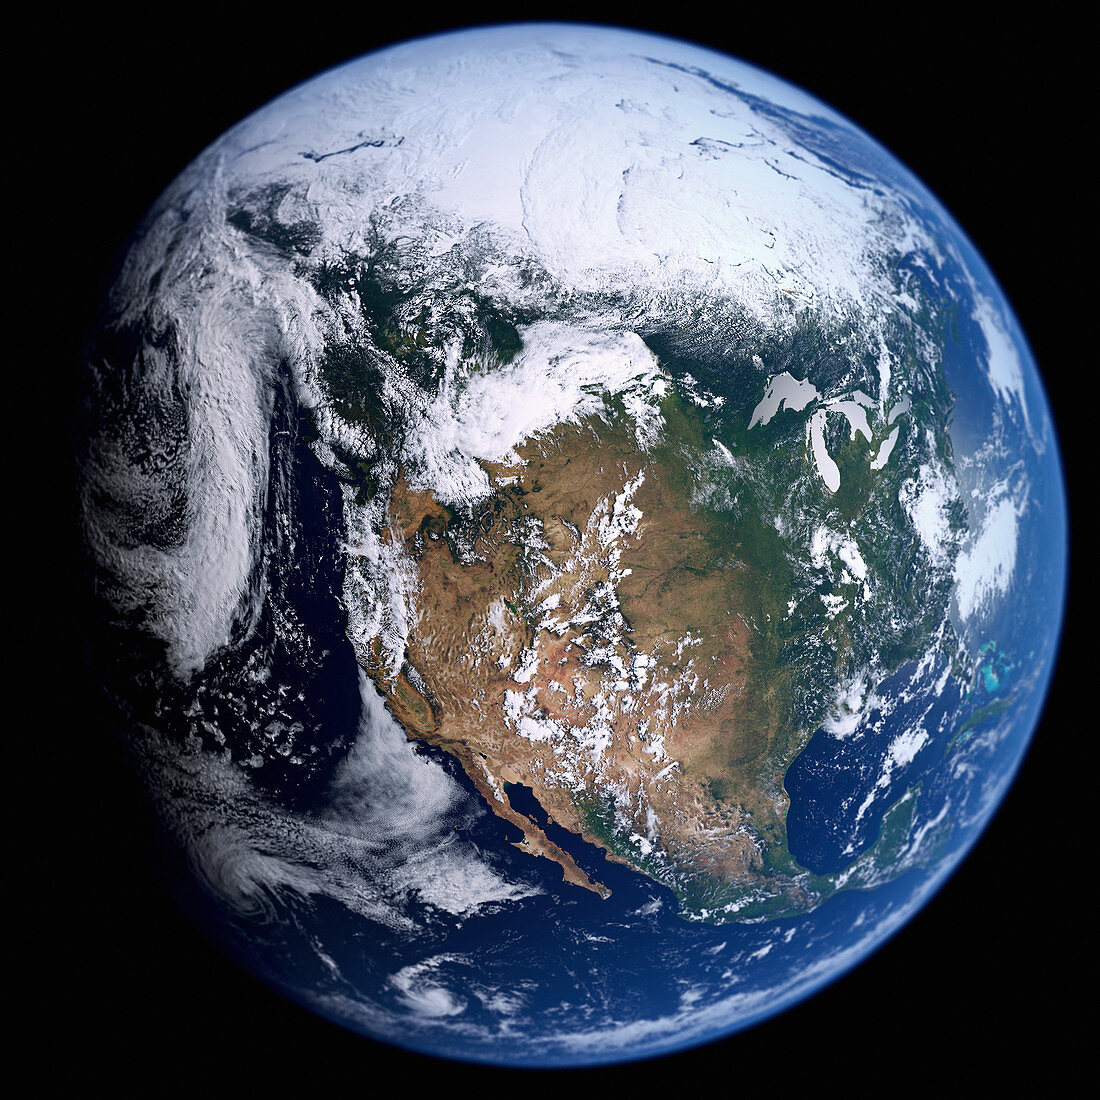 Earth from space showing the USA and Mexico, illustration